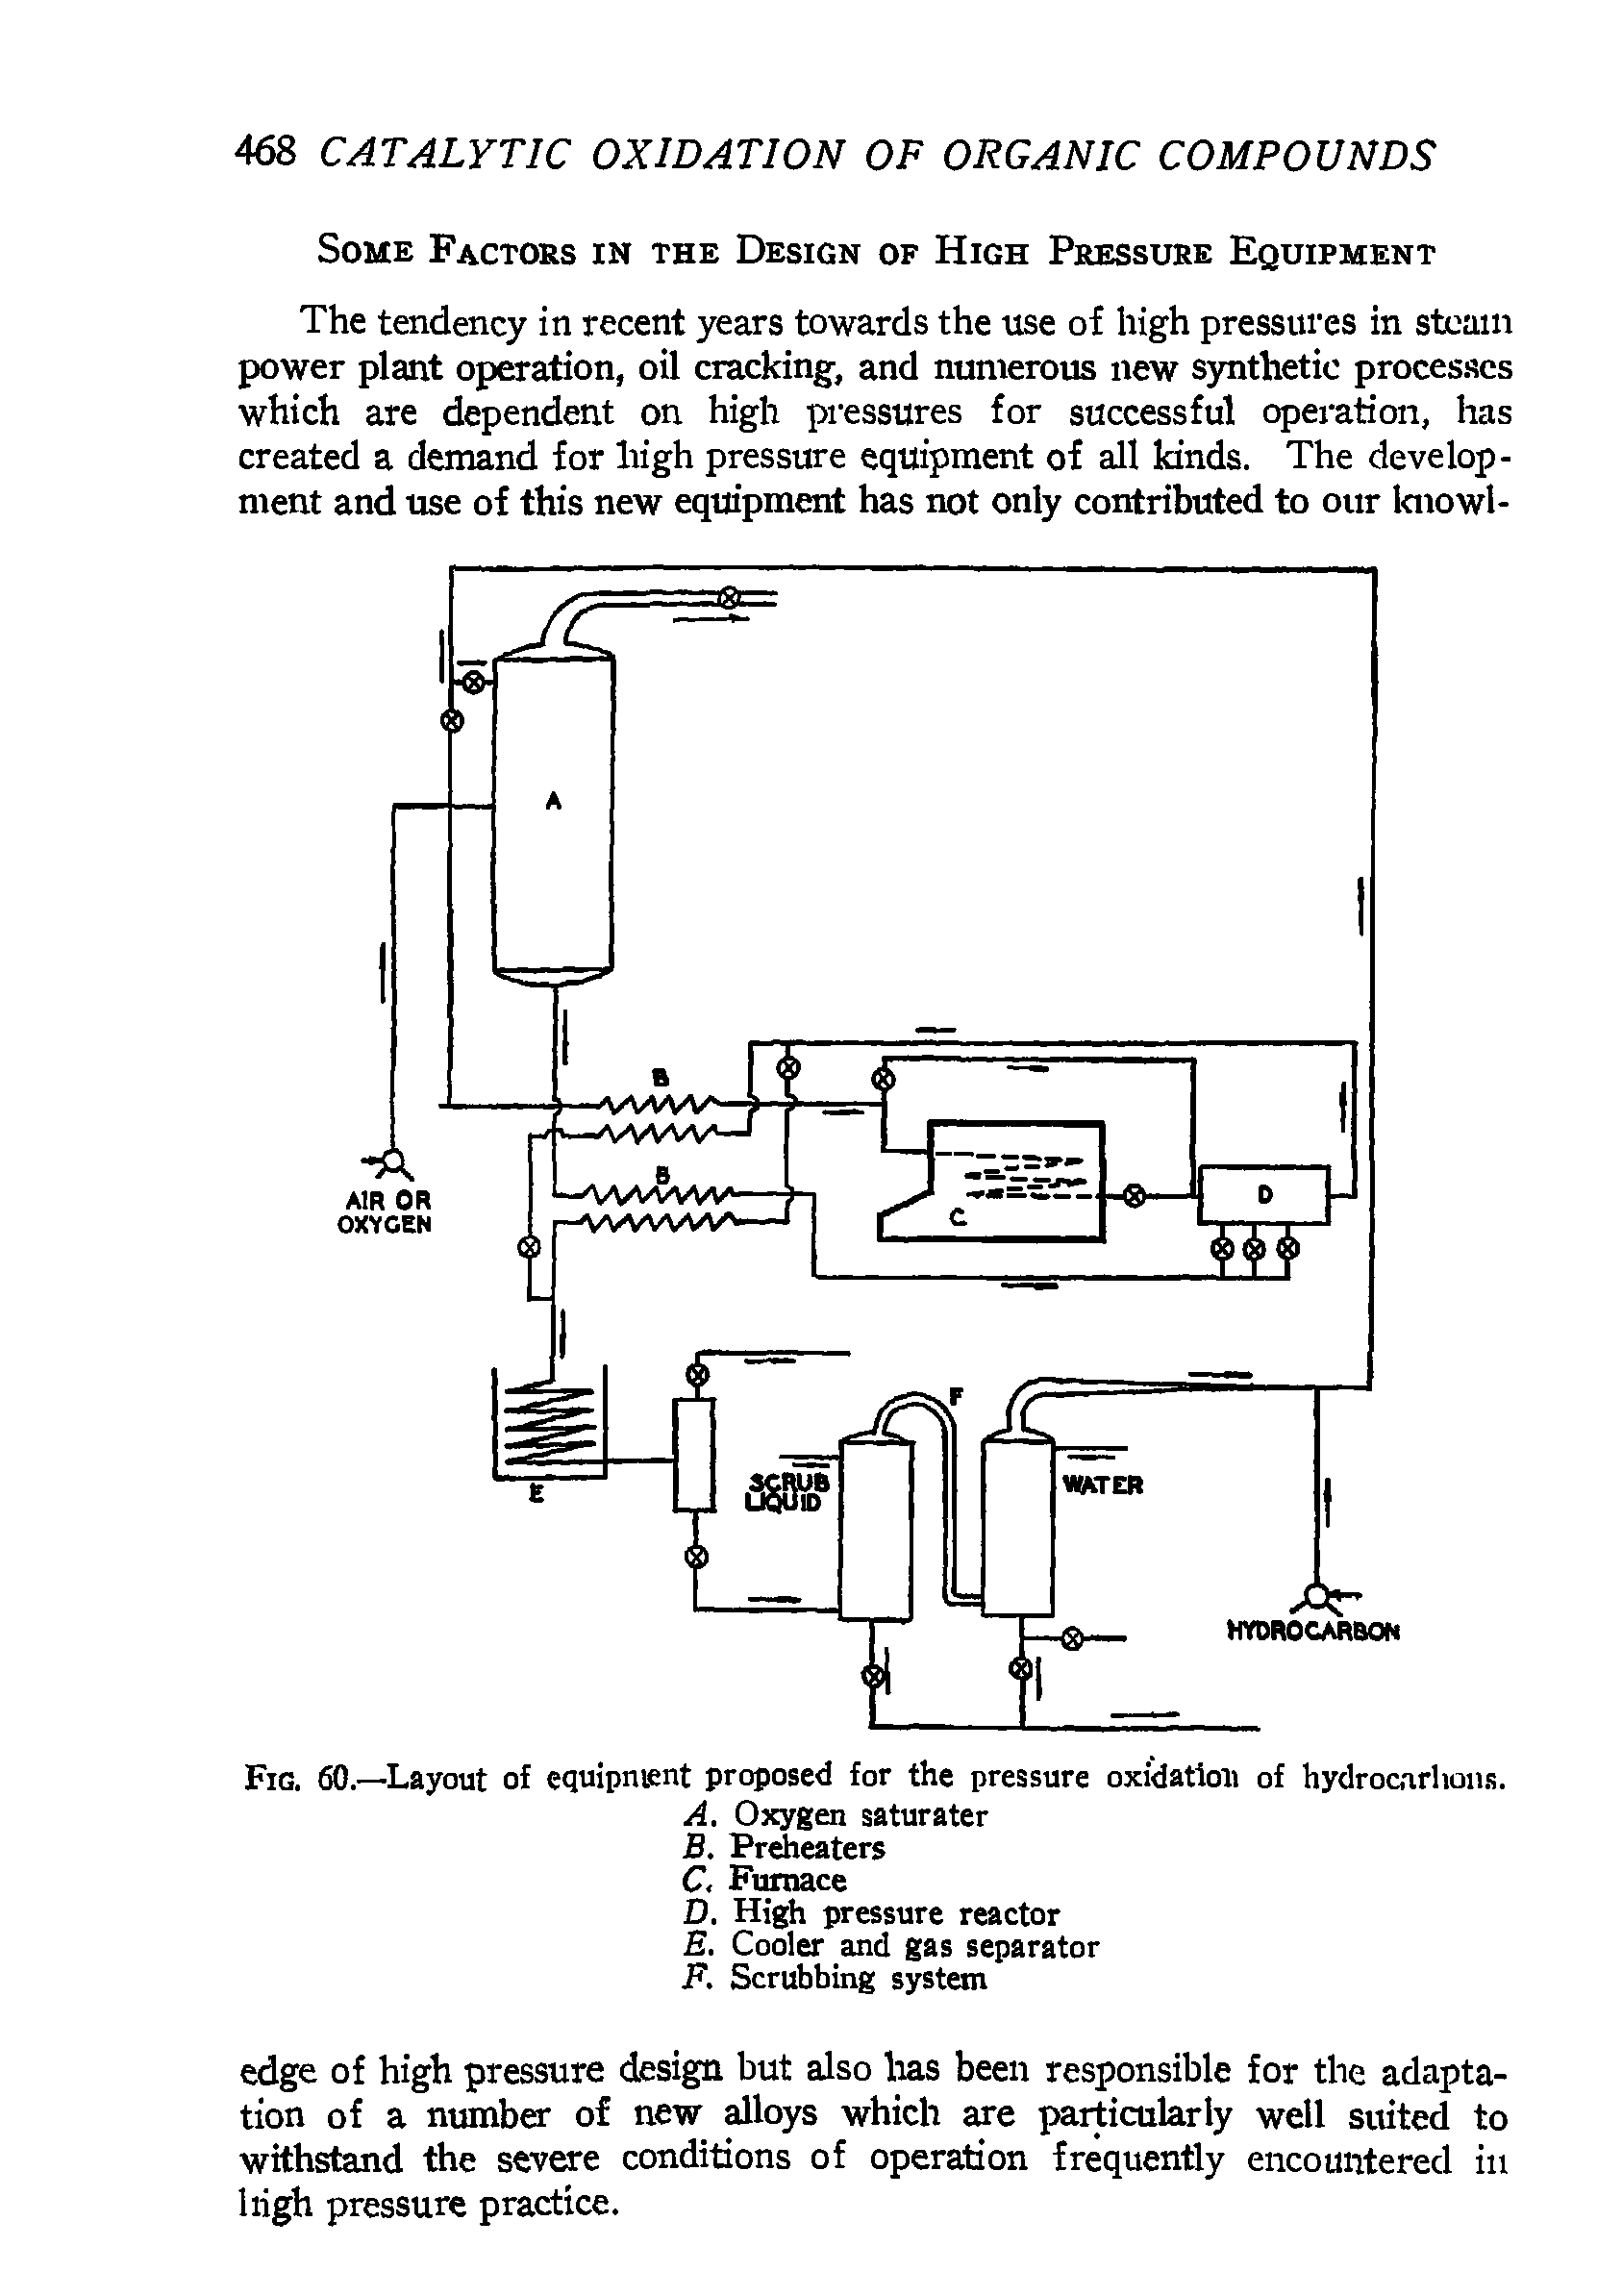 Fig. 60.—Layout of equipment proposed for the pressure oxidation of hydrocarbons.